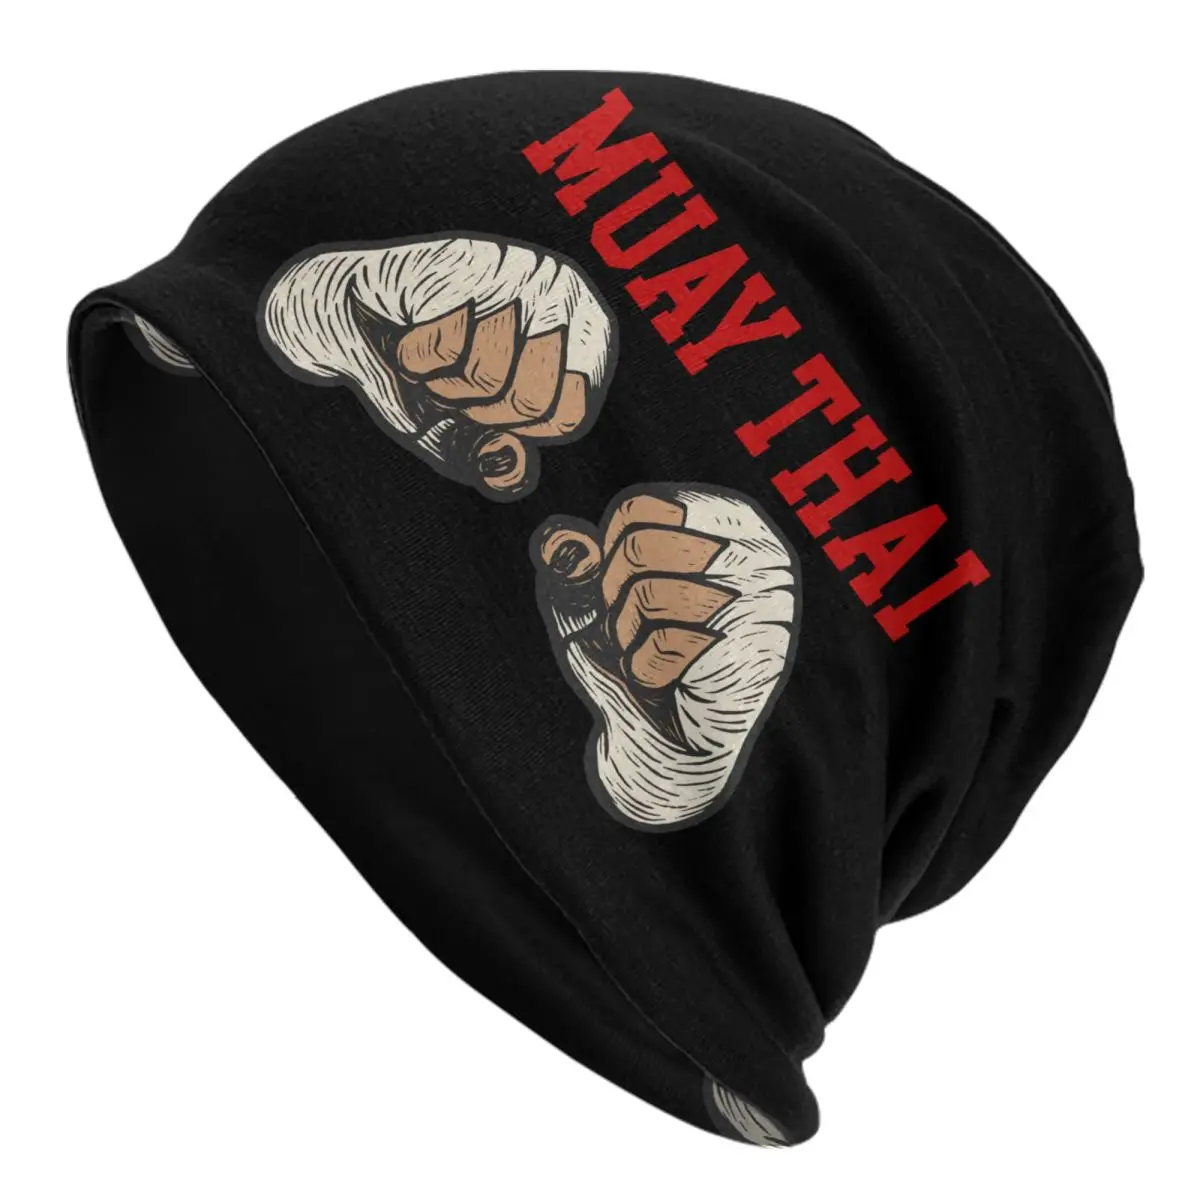 

Muay Thai Combat Workout Bonnet Hat Knitted Hat Fashion Adult Thailand Kickboxing Boxing Winter Warm Skullies Beanies Caps